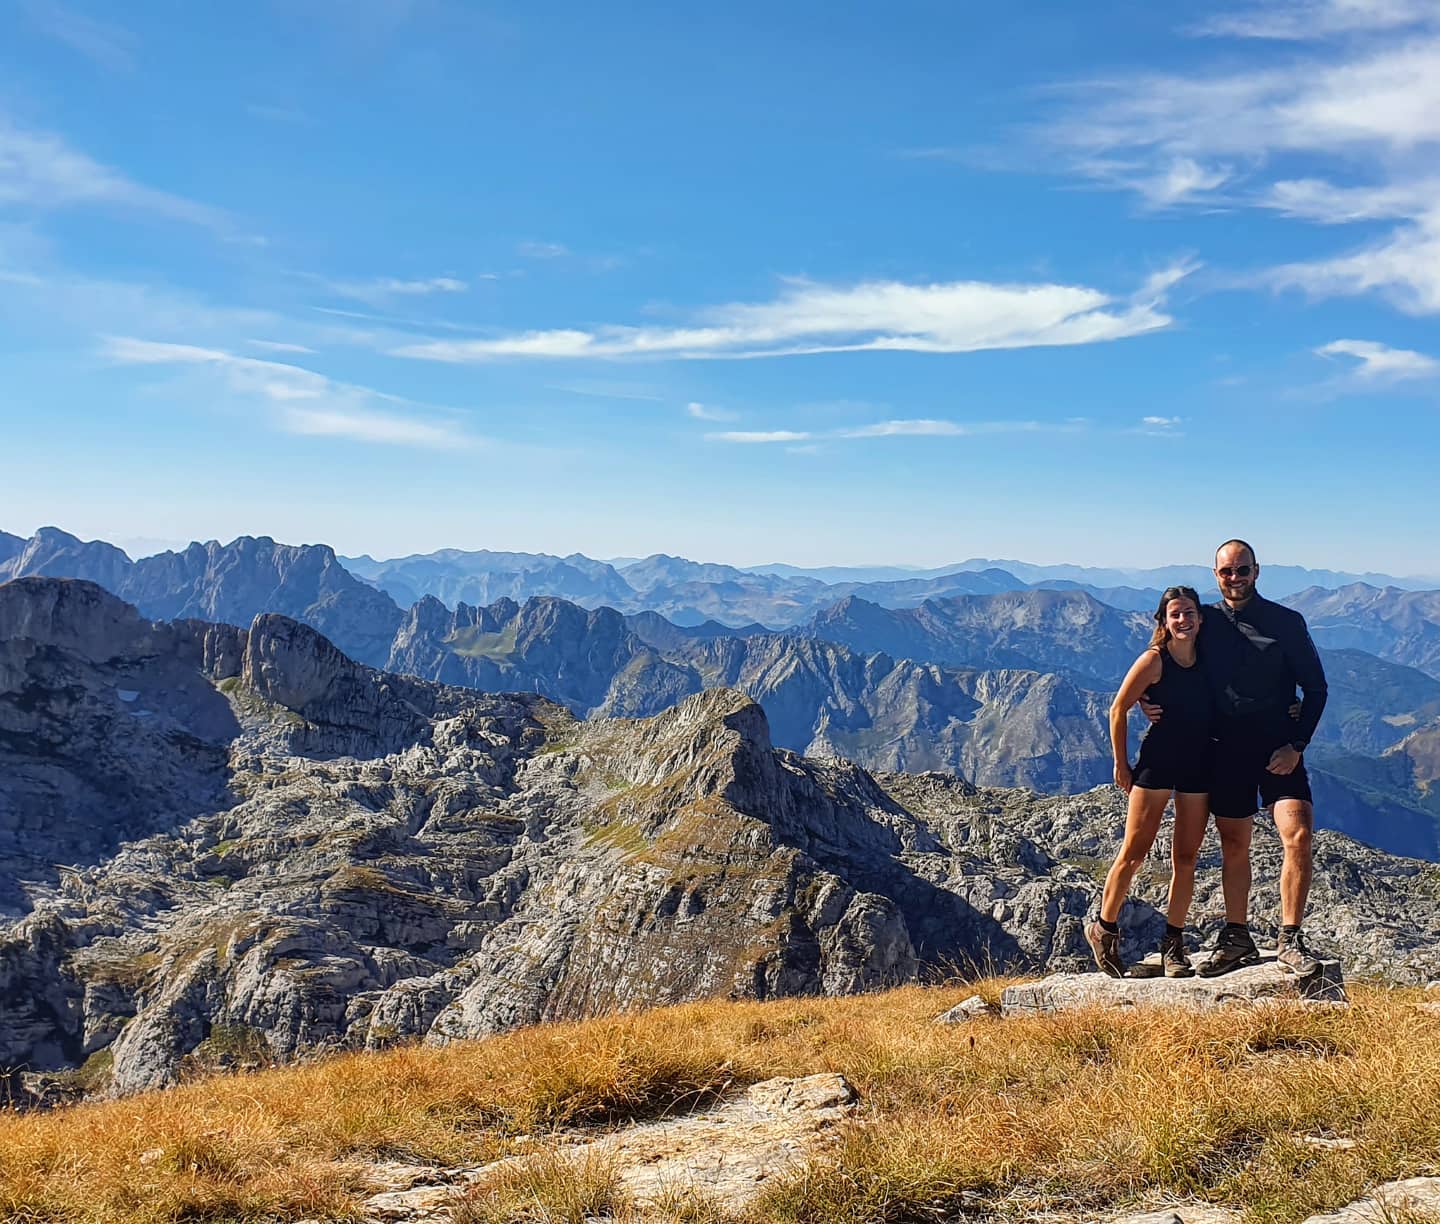 Just in time for the timer 📸I love how not-touristy it is in Montenegro. It's means we always have to bring our tripod though 😂This photo was taken on the highest peak of Montenegro. Although, some say this one is the highest, some say Bobotuv Kuk is.It's a long & exhausting hike, and highest peak or not: the 360 views are so so so rewarding and worth every step 💛Fact: this hike is part of the Peaks of the Balkans trail.#montenegro #hikinginmontenegro #hikingmontenegro #hikingthebalkans #peaksofthebalkans #zlakolata #gomontenegro #hikingineurope #KollataeKeq #ЗлаКолата #dutchblogger #travelblog #outdooradventures #mountaingirl #natureismyplayground #mountainadventures #adventurespirit #hikingtheglobe #wereldwijdwandelen